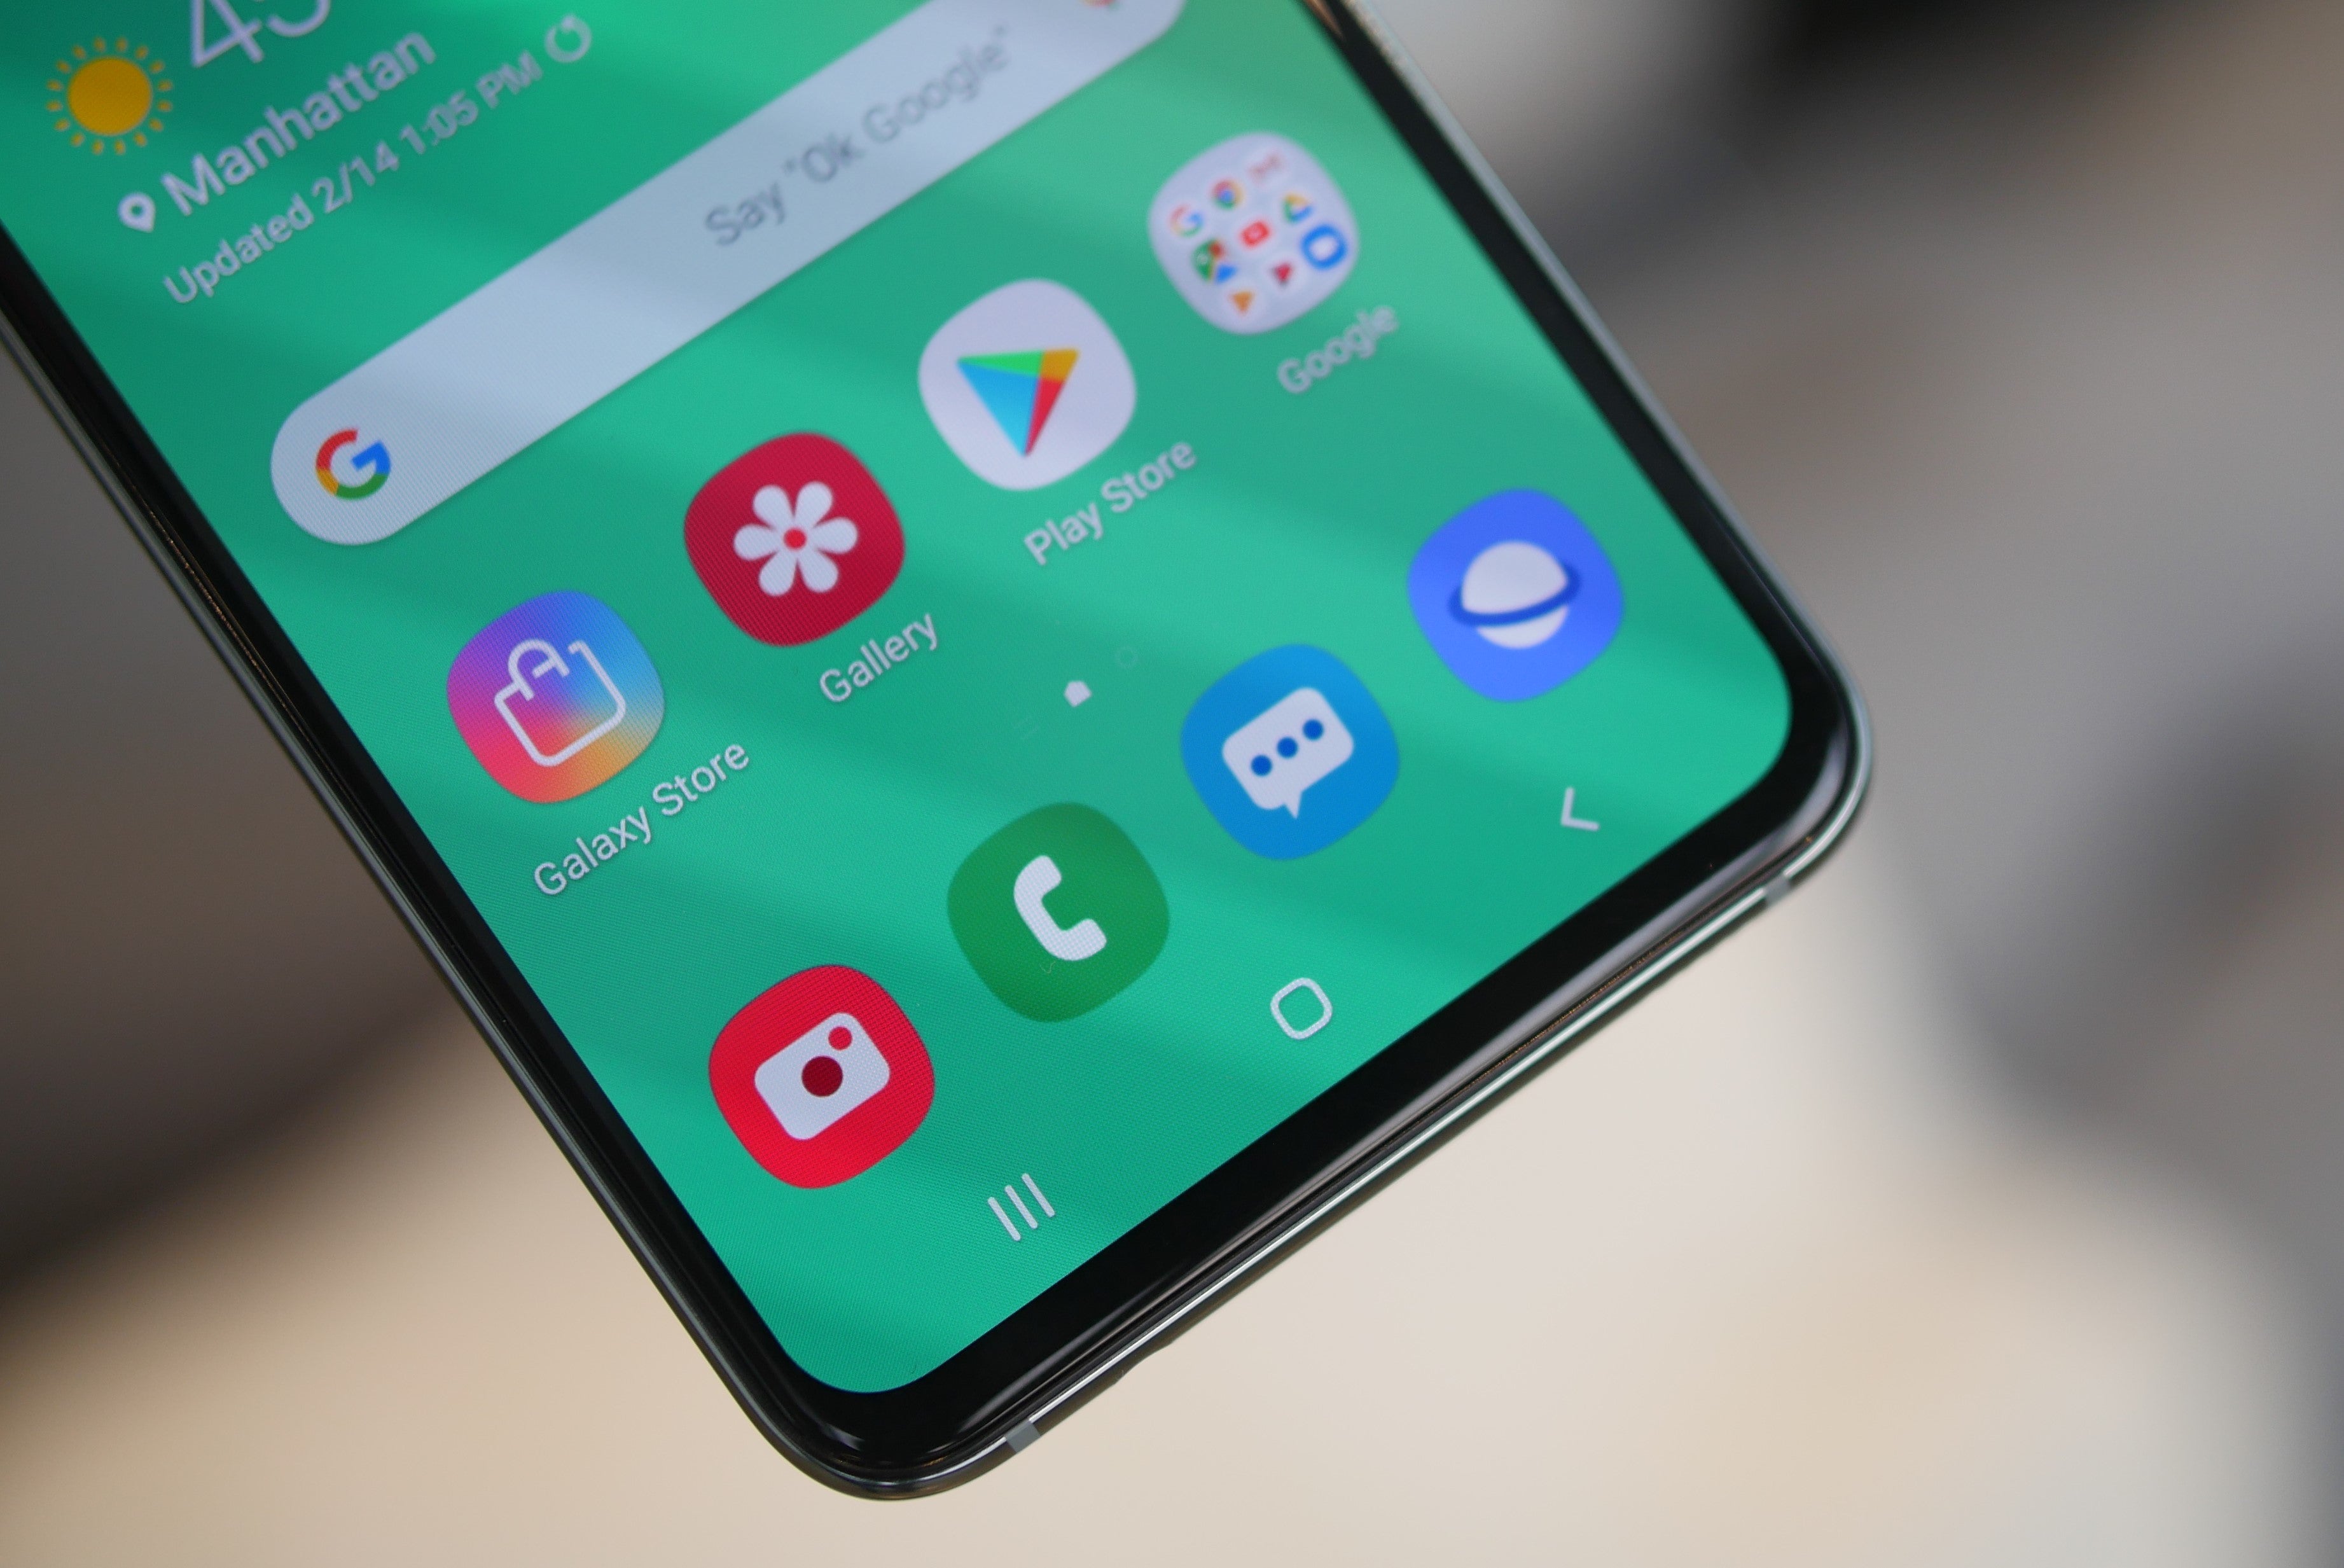 Don&#039;t worry, Samsung changed more than the icons! - The new Samsung Galaxy S10, S10+, S10e, S10 5G smartphones are official, here&#039;s everything you need to know!